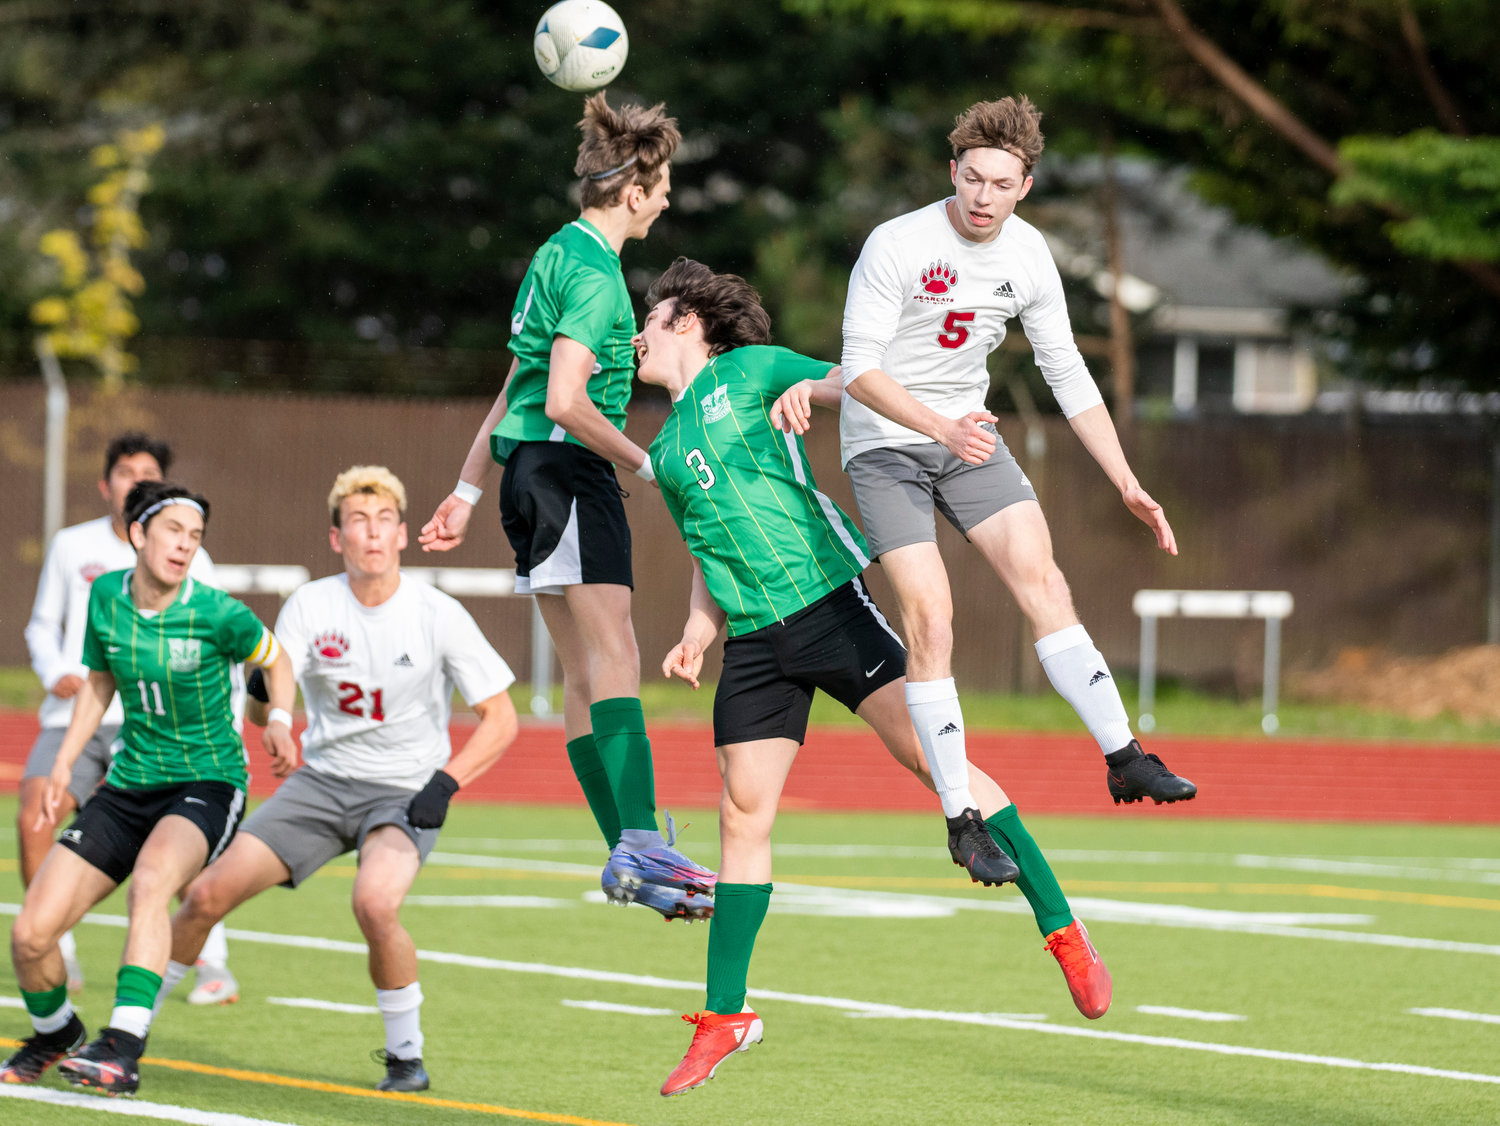 A group of Tumwater and W.F. West players leap for a header on a corner kick near Tumwater's goal during the district semifinals on May 12.